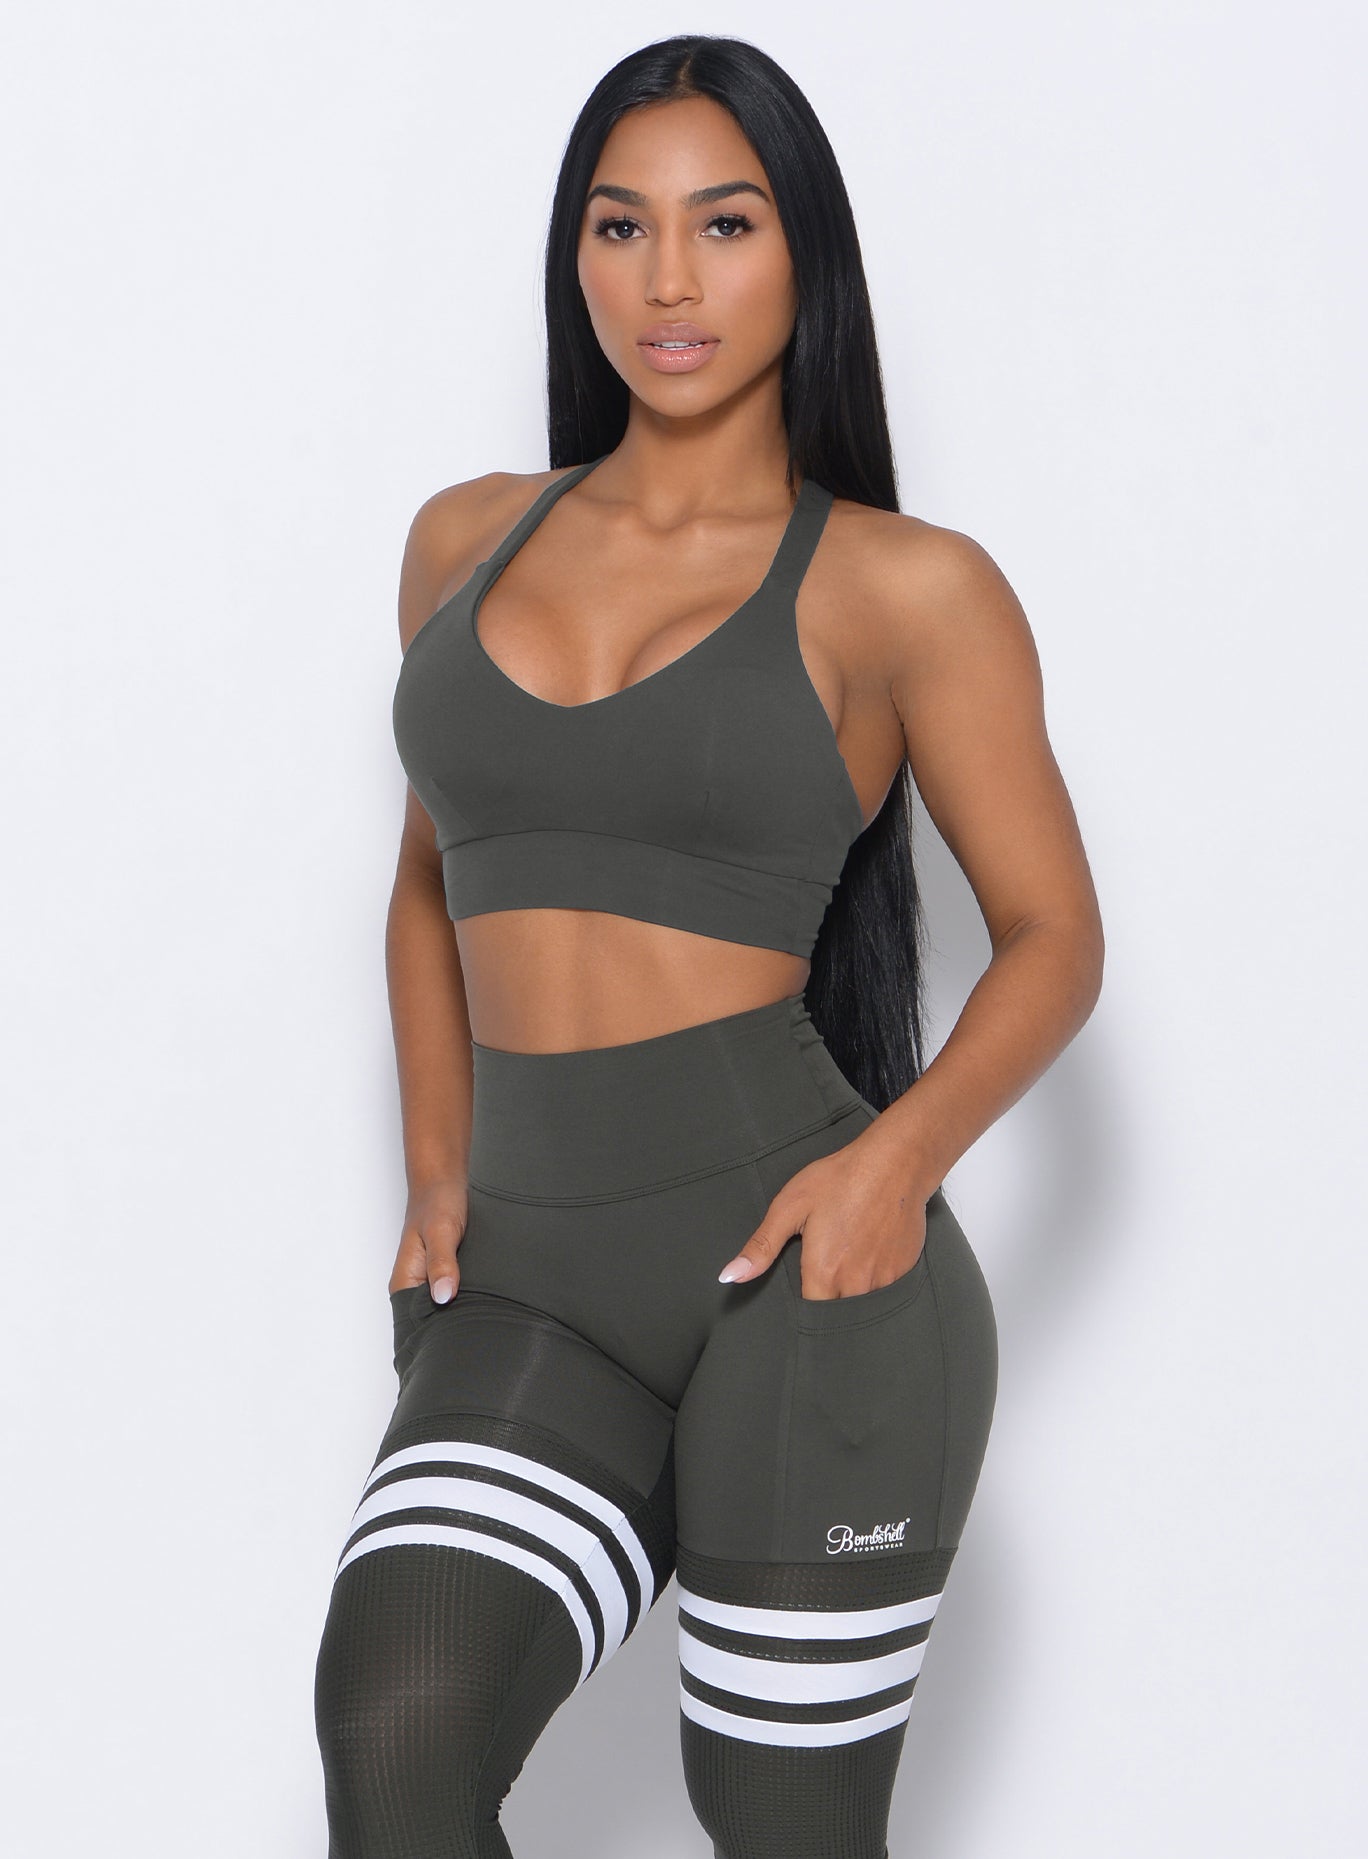 Front profile view of the model in our synergy sports bra in hunter green color and a matching leggings